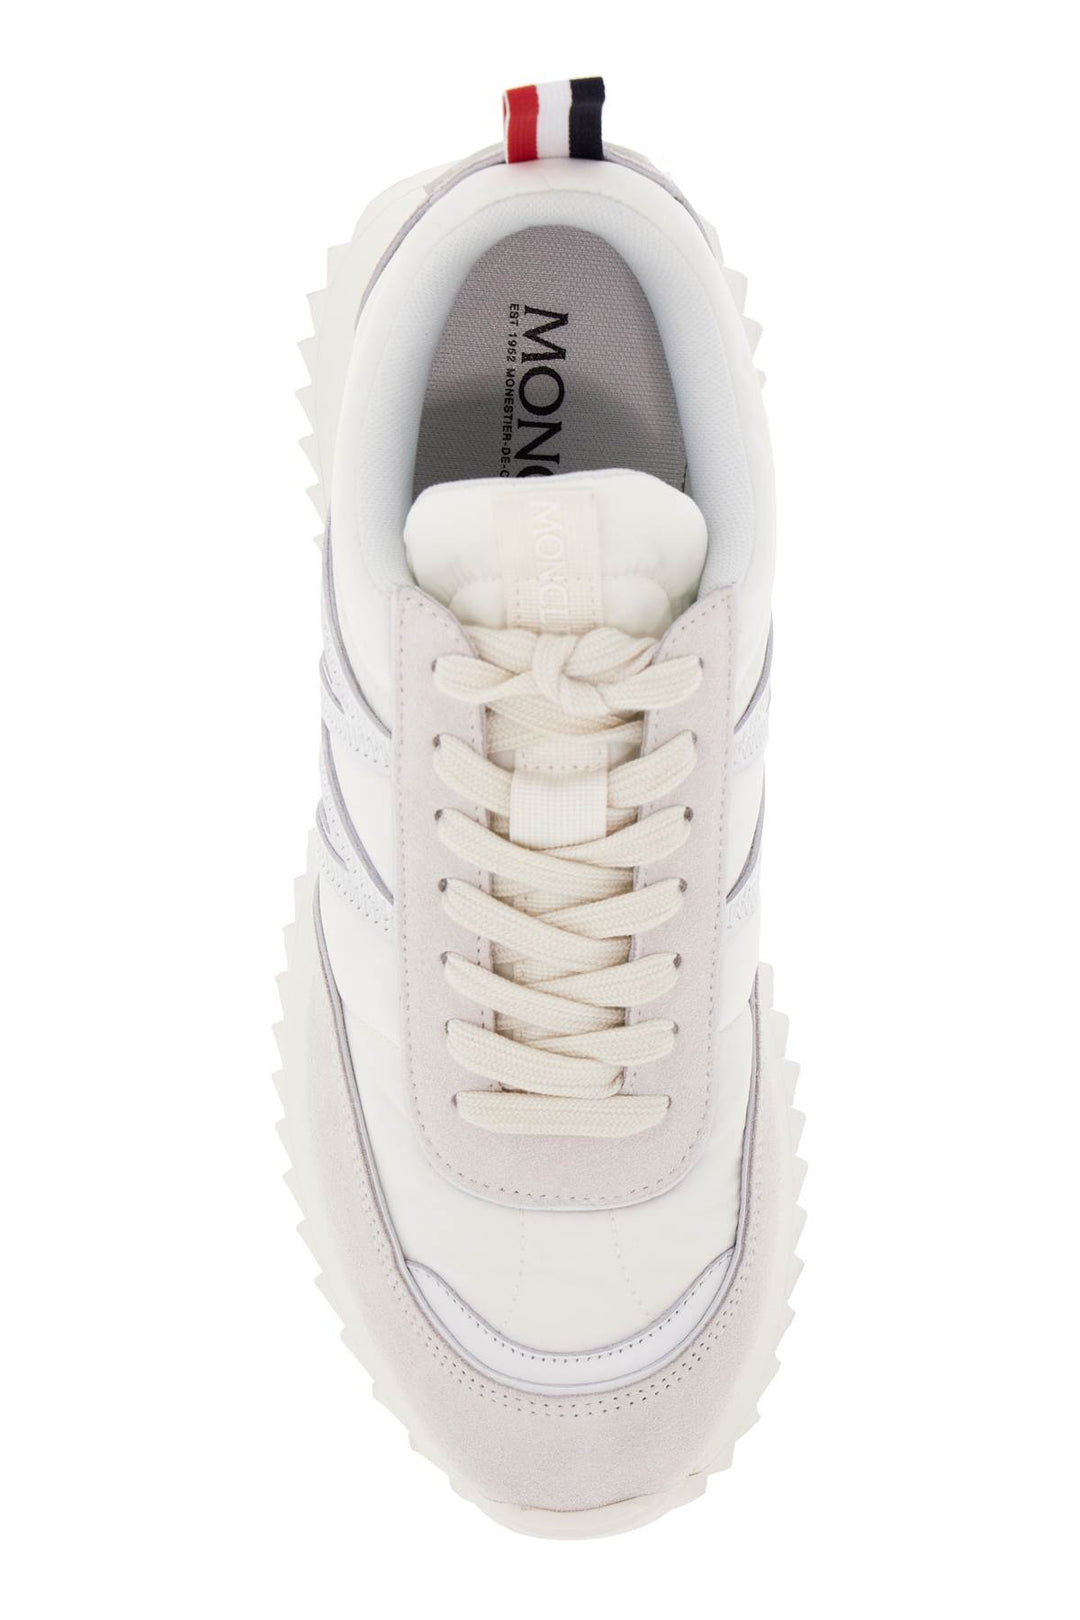 Moncler Pacey Sneakers   White